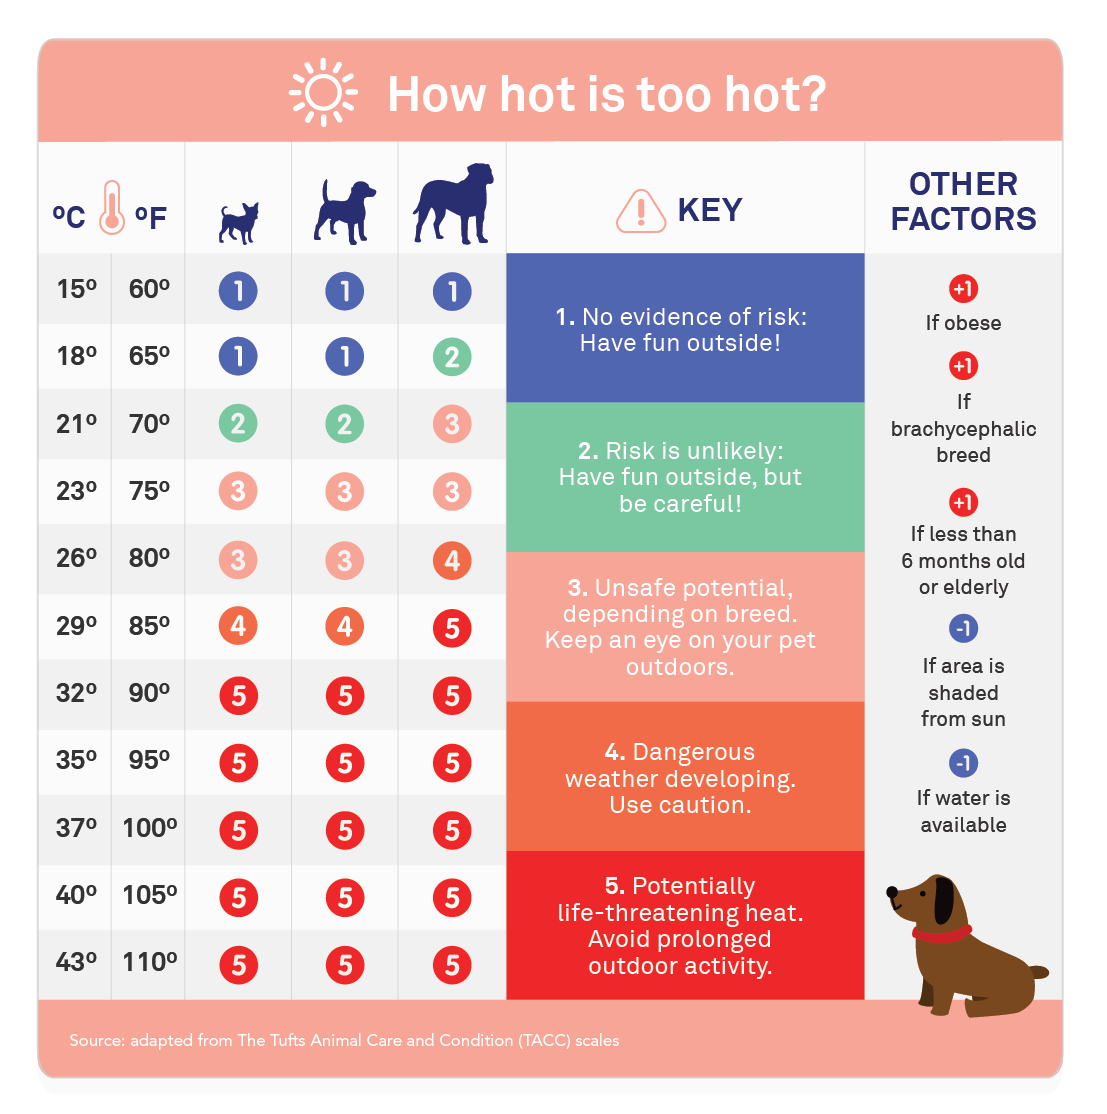 How Hot Is Too Hot infographic